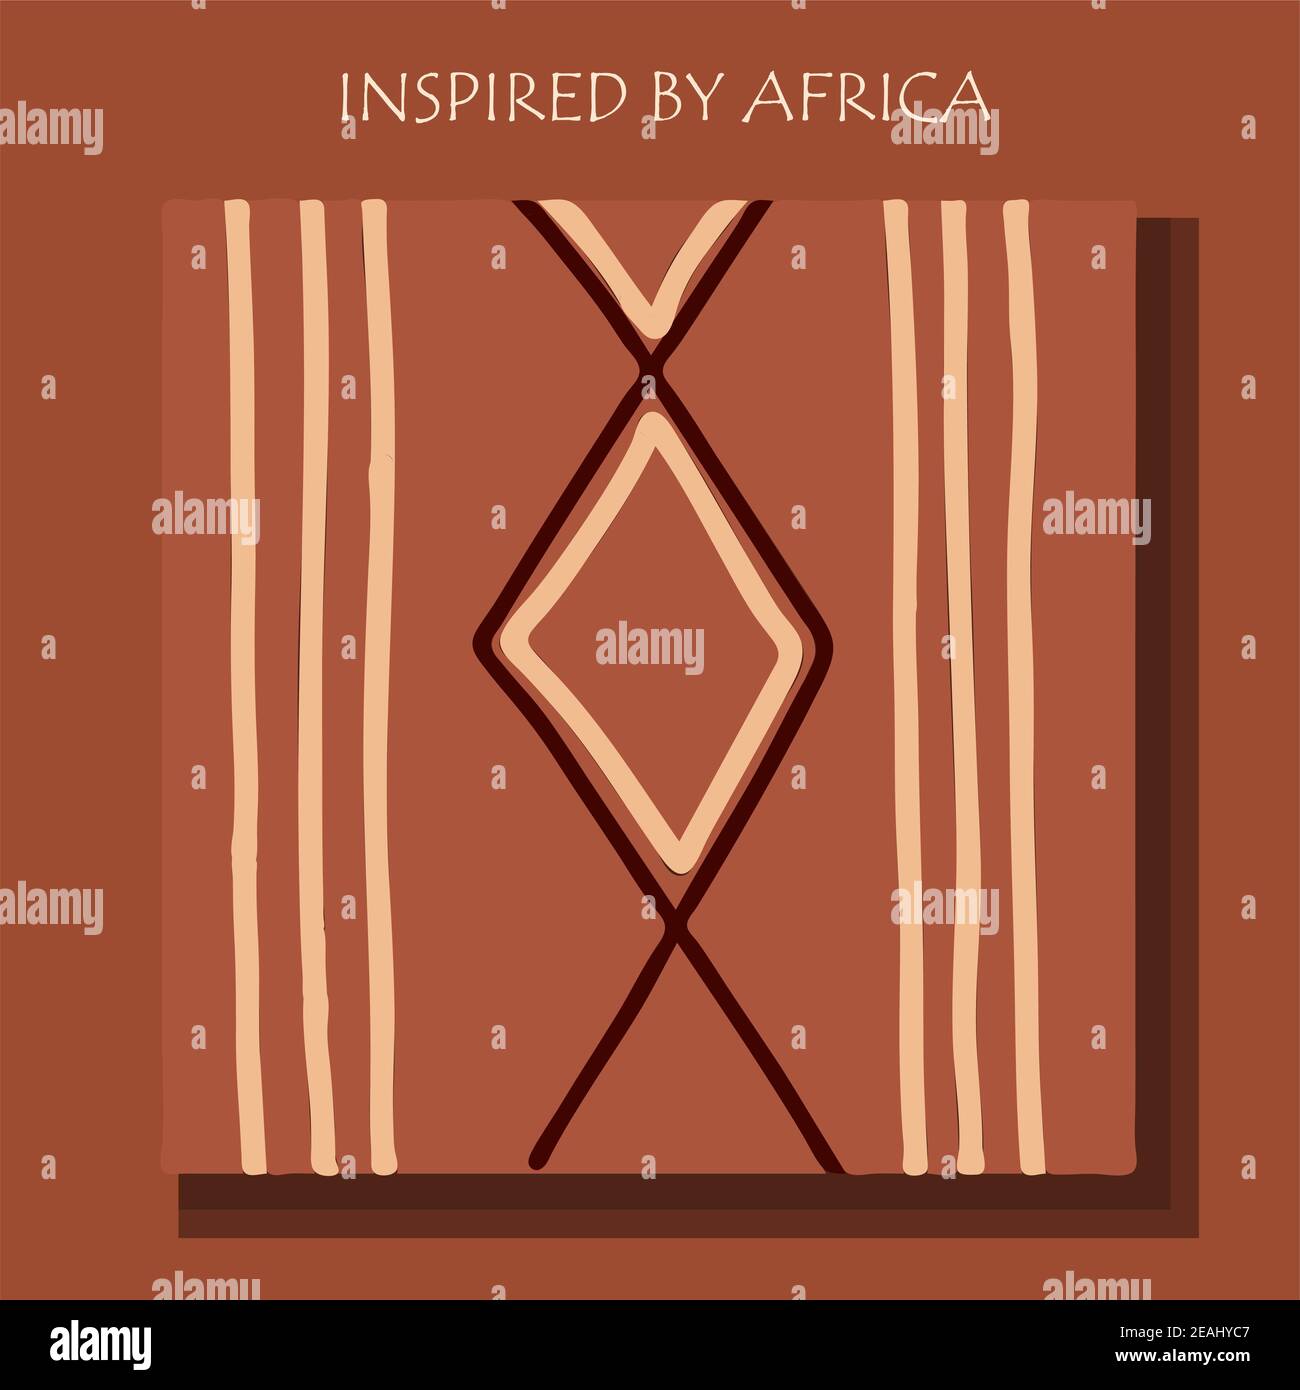 INSPIRED BY AFRICA. African background, flyer with tribal traditional pattern. Stock Photo